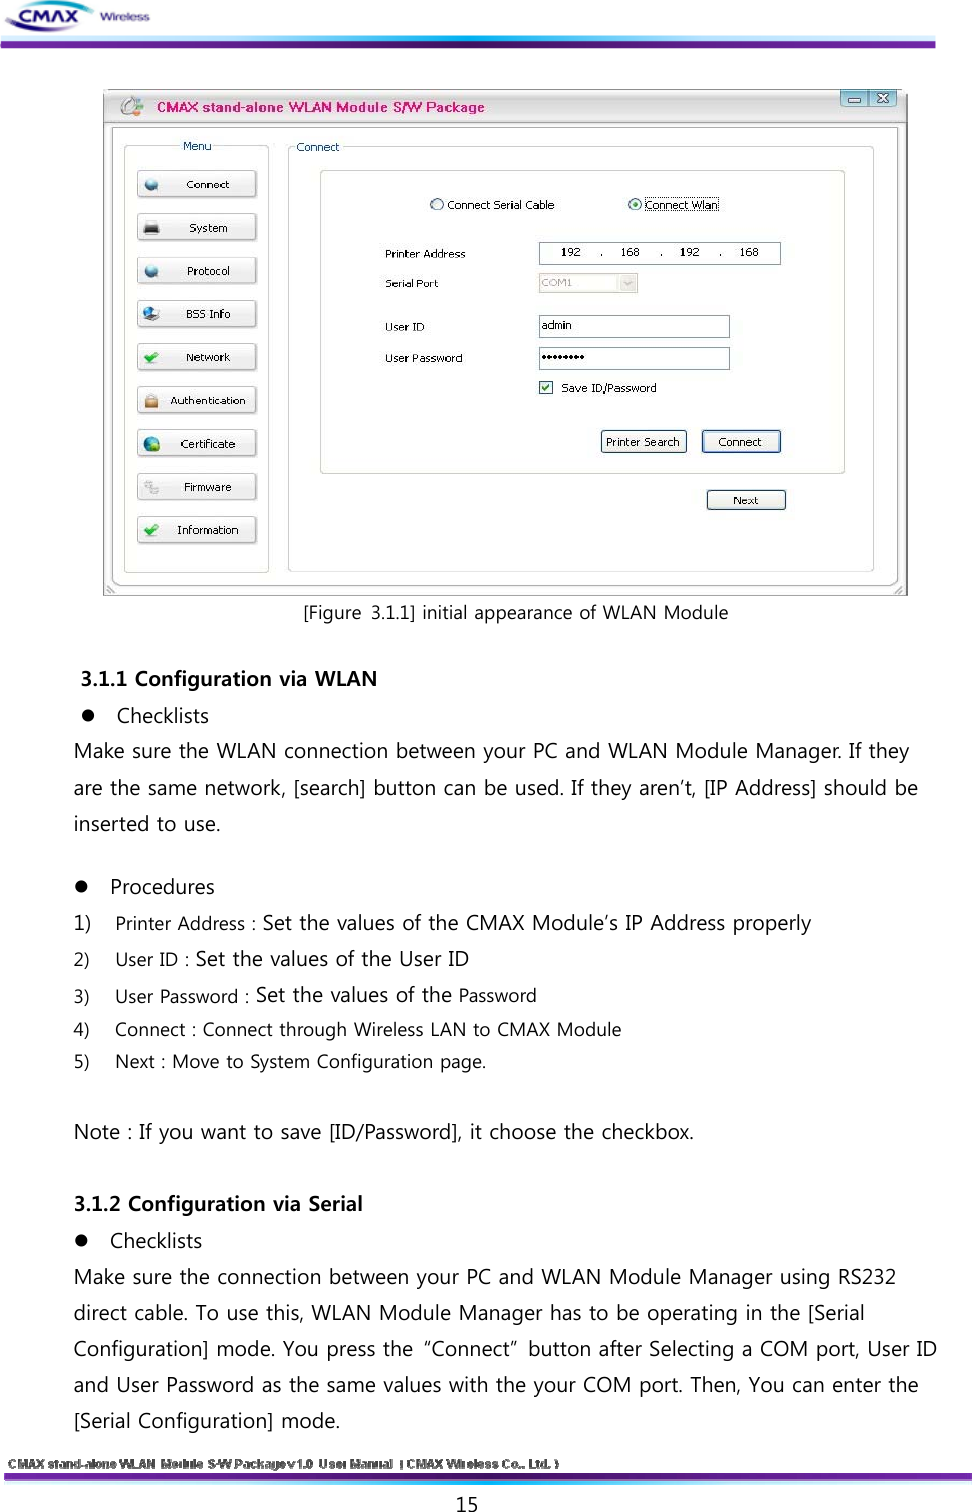   15   [Figure 3.1.1] initial appearance of WLAN Module  3.1.1 Configuration via WLAN   Checklists   Make sure the WLAN connection between your PC and WLAN Module Manager. If they are the same network, [search] button can be used. If they aren’t, [IP Address] should be inserted to use. Procedures   1) Printer Address : Set the values of the CMAX Module’s IP Address properly   2) User ID : Set the values of the User ID 3) User Password : Set the values of the Password 4) Connect : Connect through Wireless LAN to CMAX Module 5) Next : Move to System Configuration page.  Note : If you want to save [ID/Password], it choose the checkbox.  3.1.2 Configuration via Serial Checklists   Make sure the connection between your PC and WLAN Module Manager using RS232 direct cable. To use this, WLAN Module Manager has to be operating in the [Serial Configuration] mode. You press the  “Connect”  button after Selecting a COM port, User ID and User Password as the same values with the your COM port. Then, You can enter the [Serial Configuration] mode. 